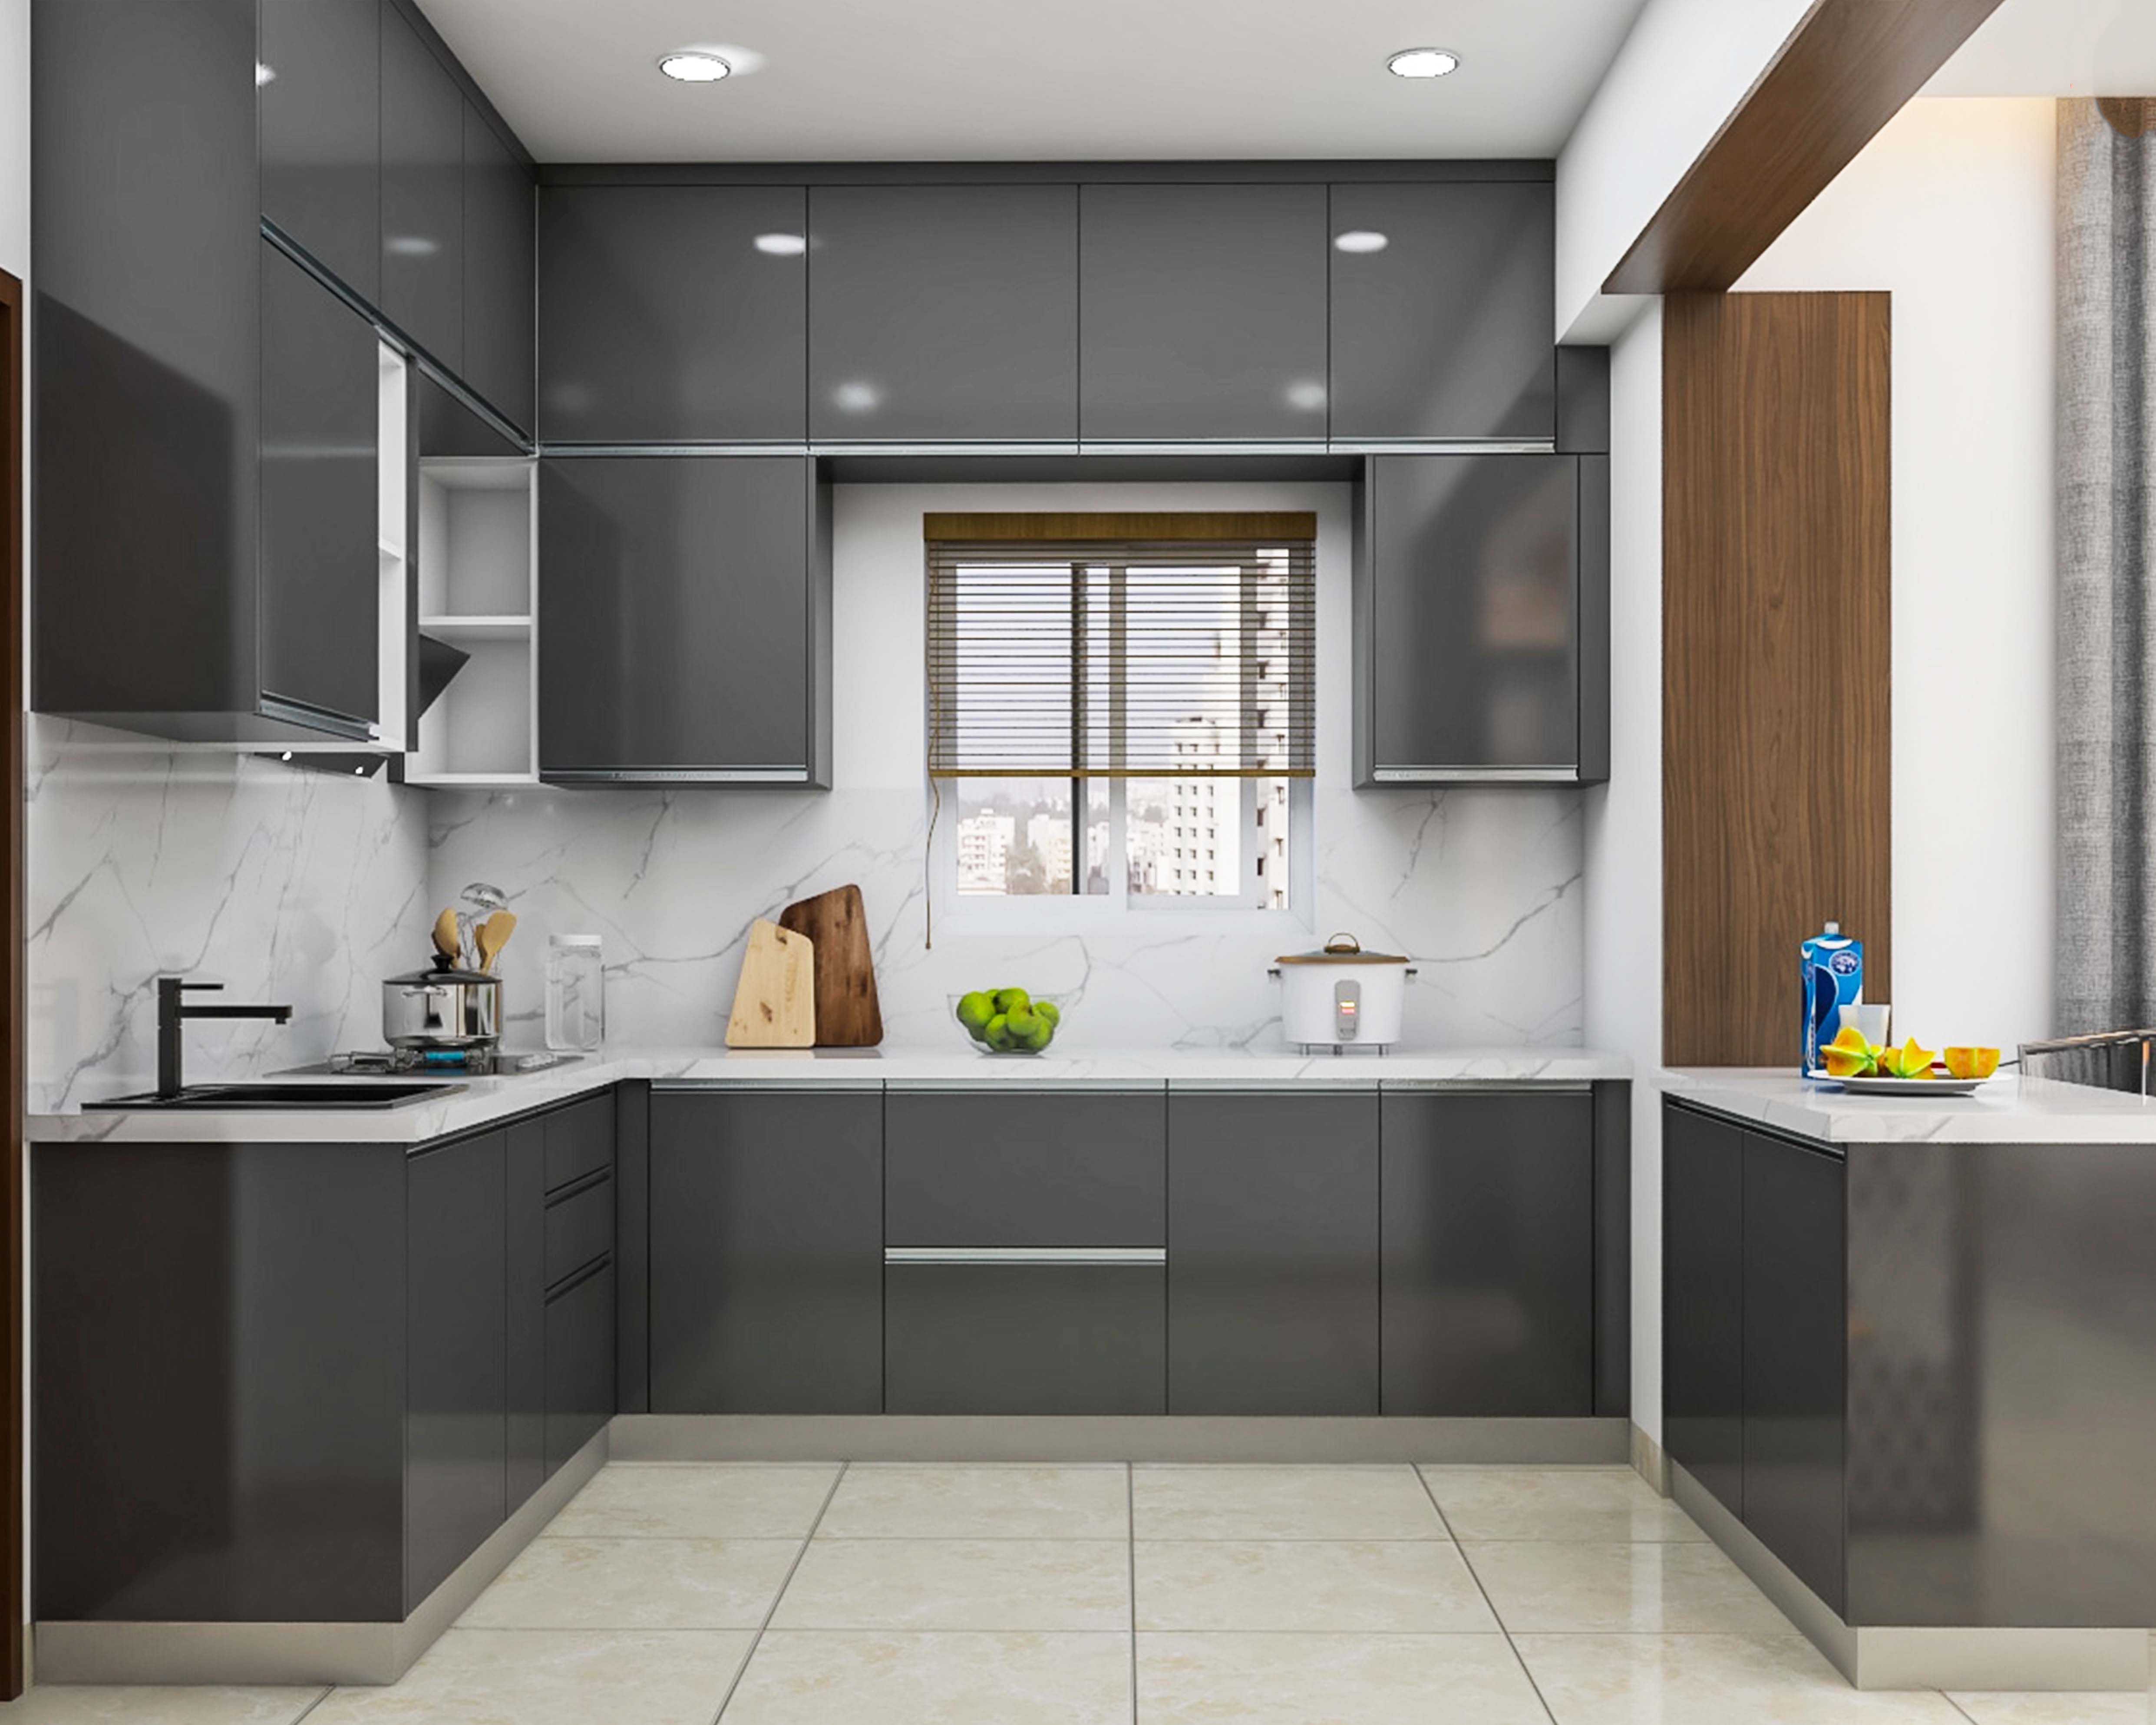 Modern Black Indian Kitchen Design With L-Shaped Layout